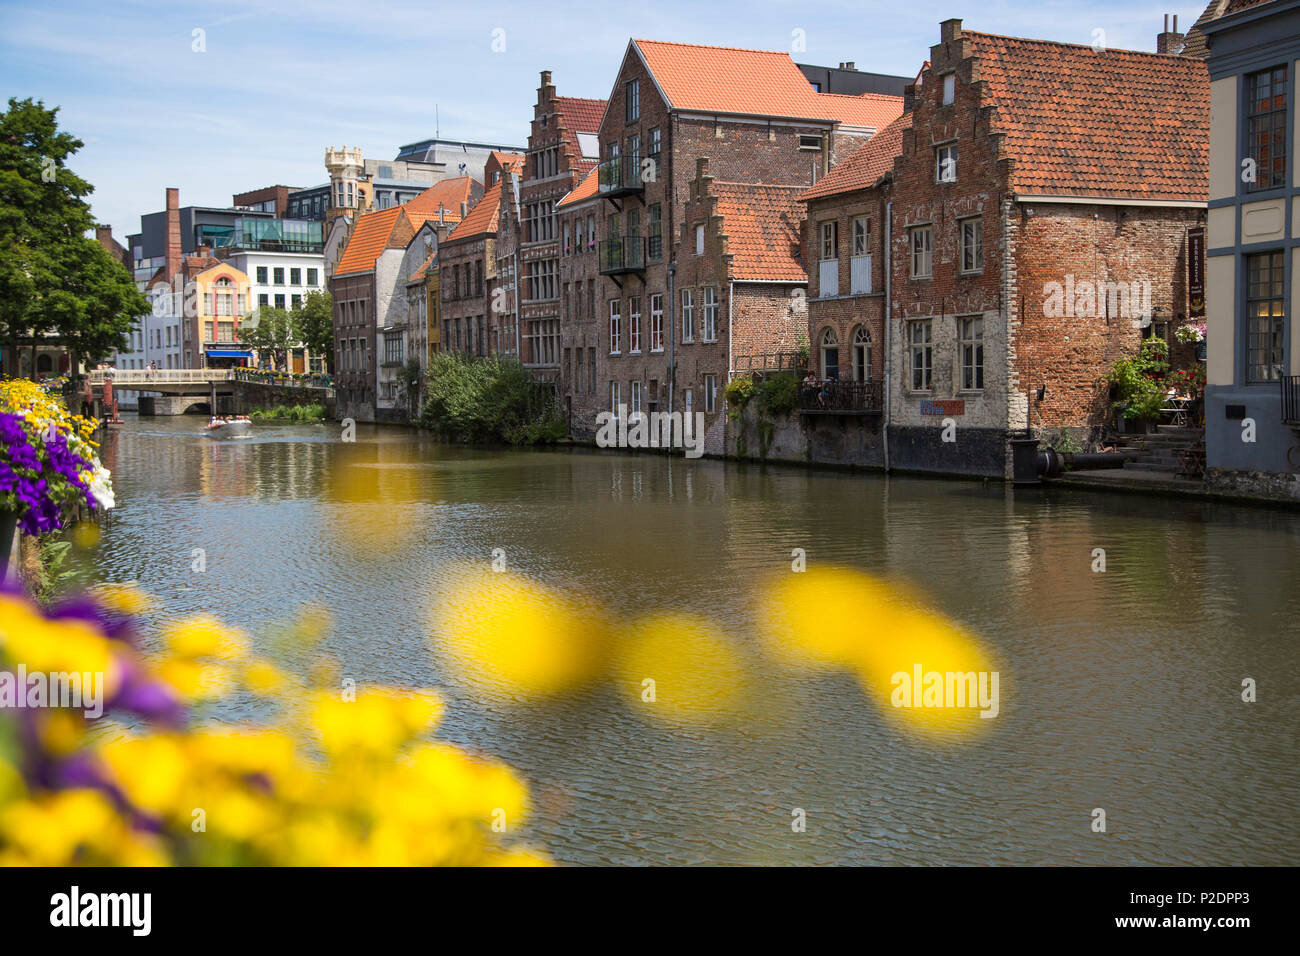 Sightseeing boat on the canal seen through flowers, Ghent, Flemish Region, Belgium Stock Photo